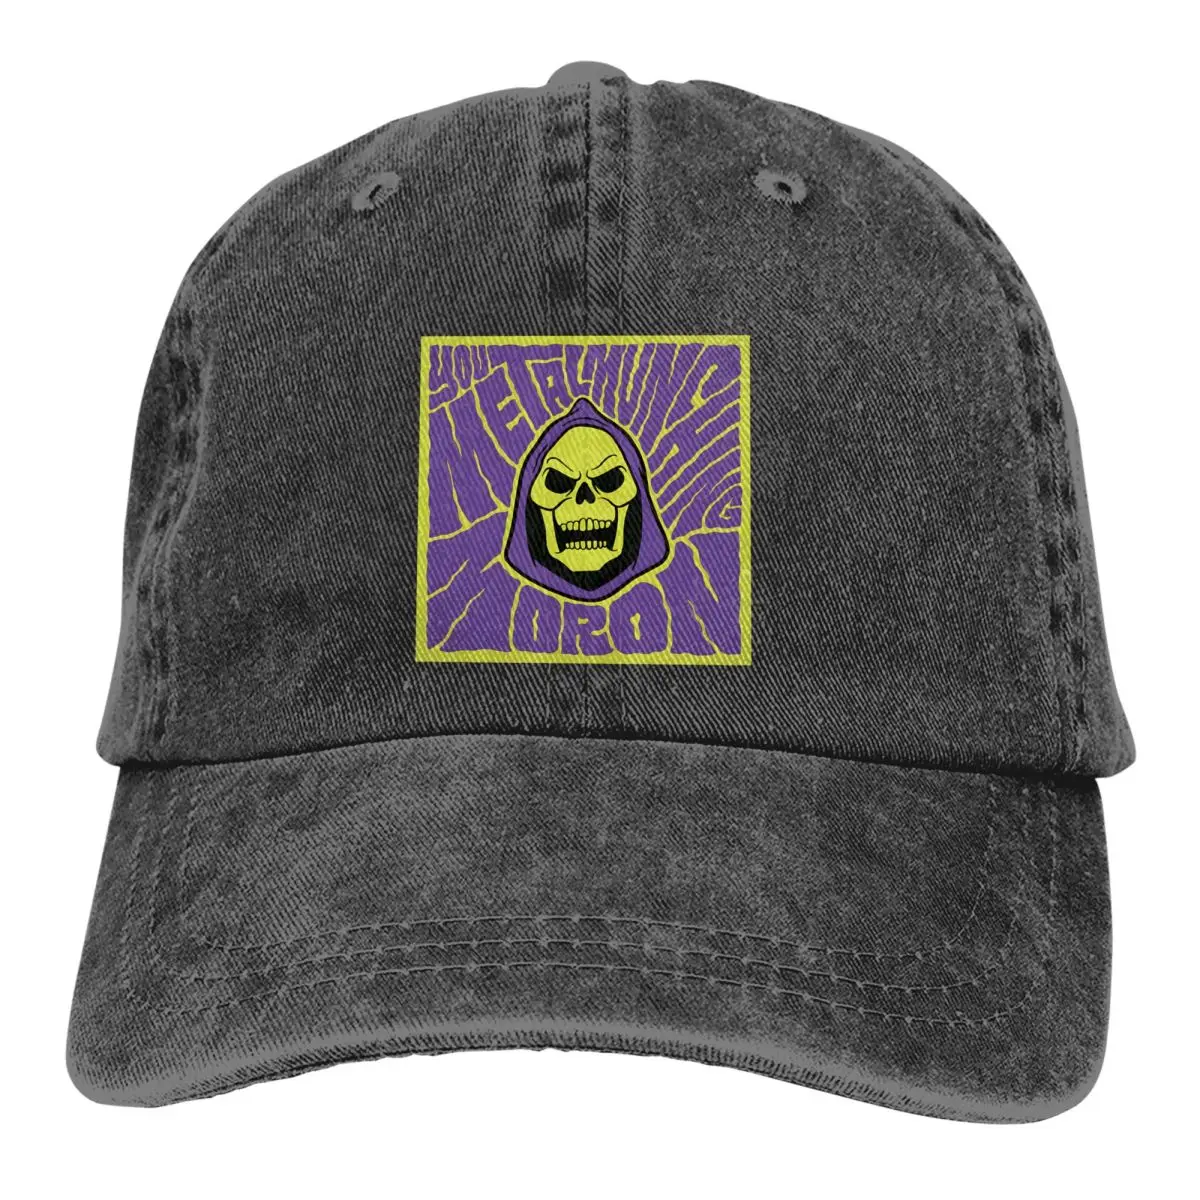 

Pure Color Dad Hats Skeletor Humor Women's Hat Sun Visor Baseball Caps He-Man and The Masters of The Universe Peaked Cap